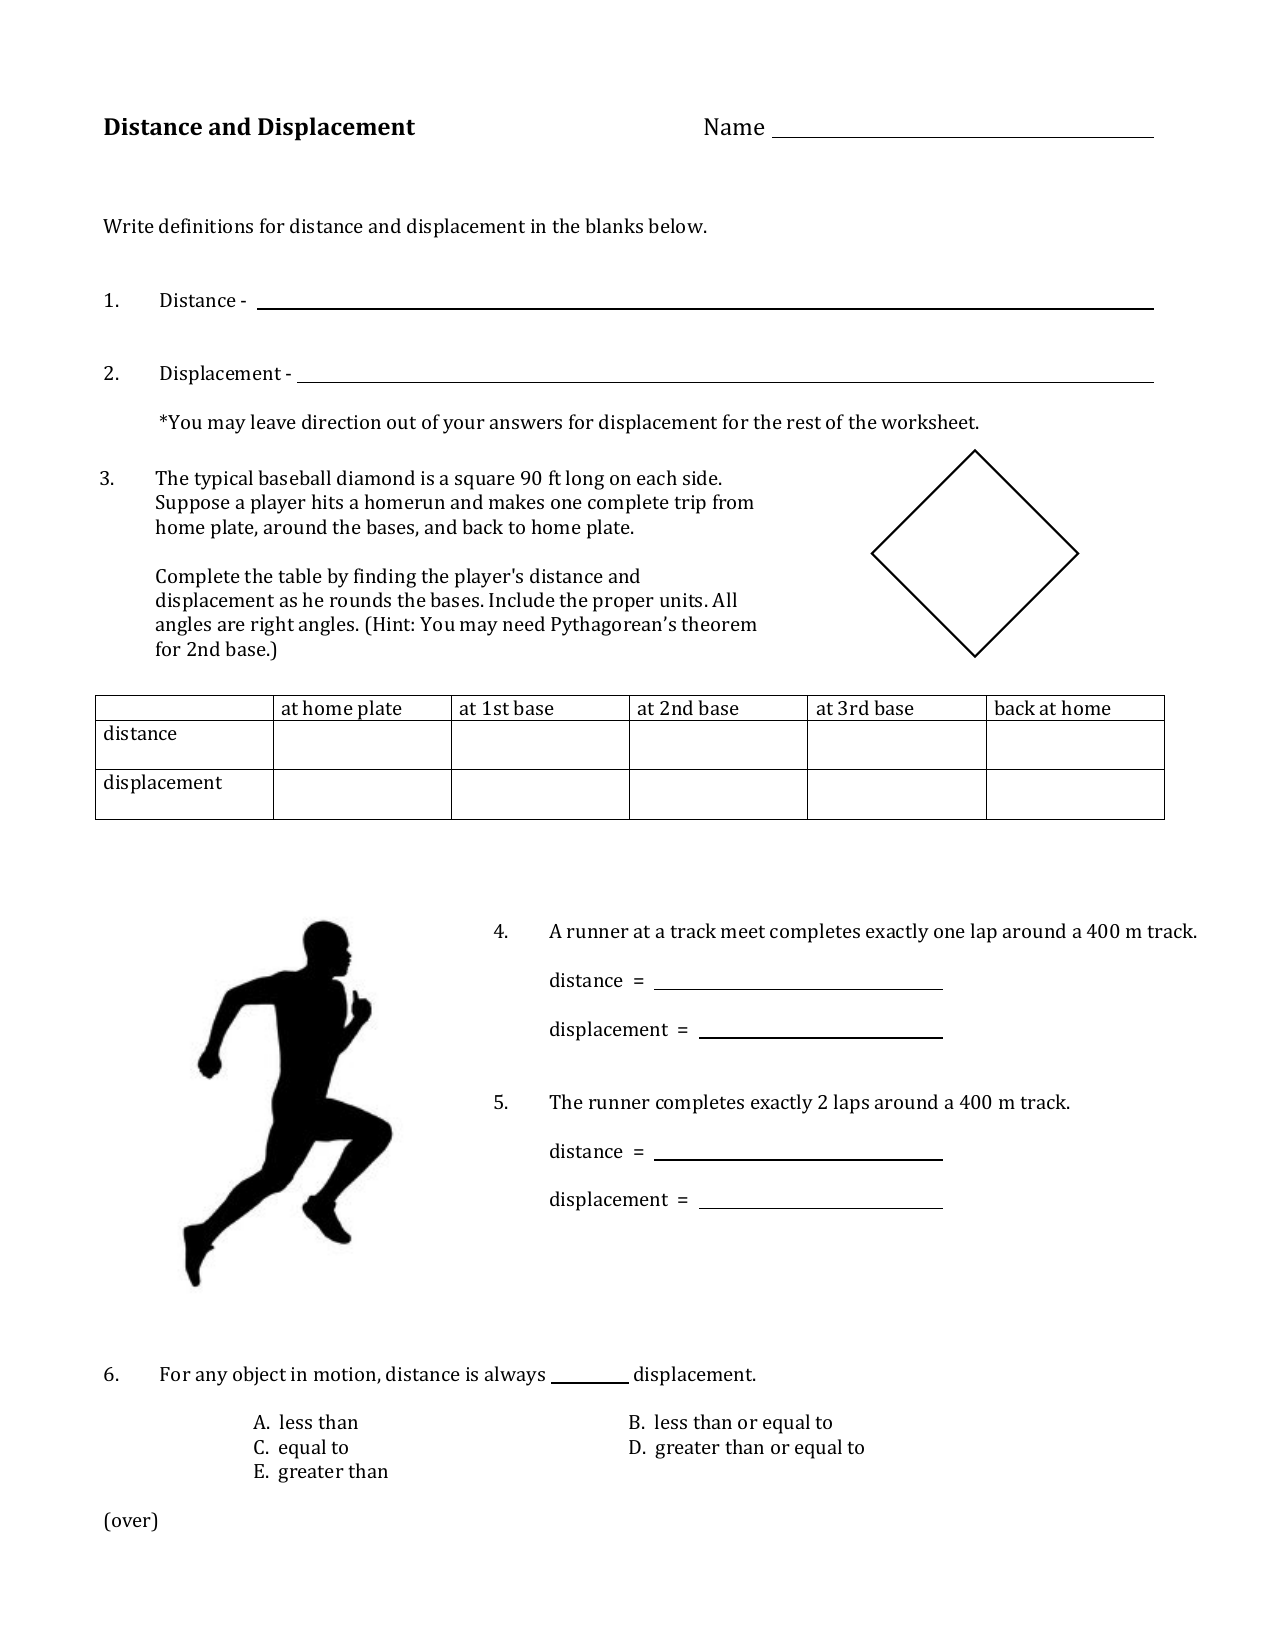 distance-and-displacement-worksheet-answers-word-worksheet